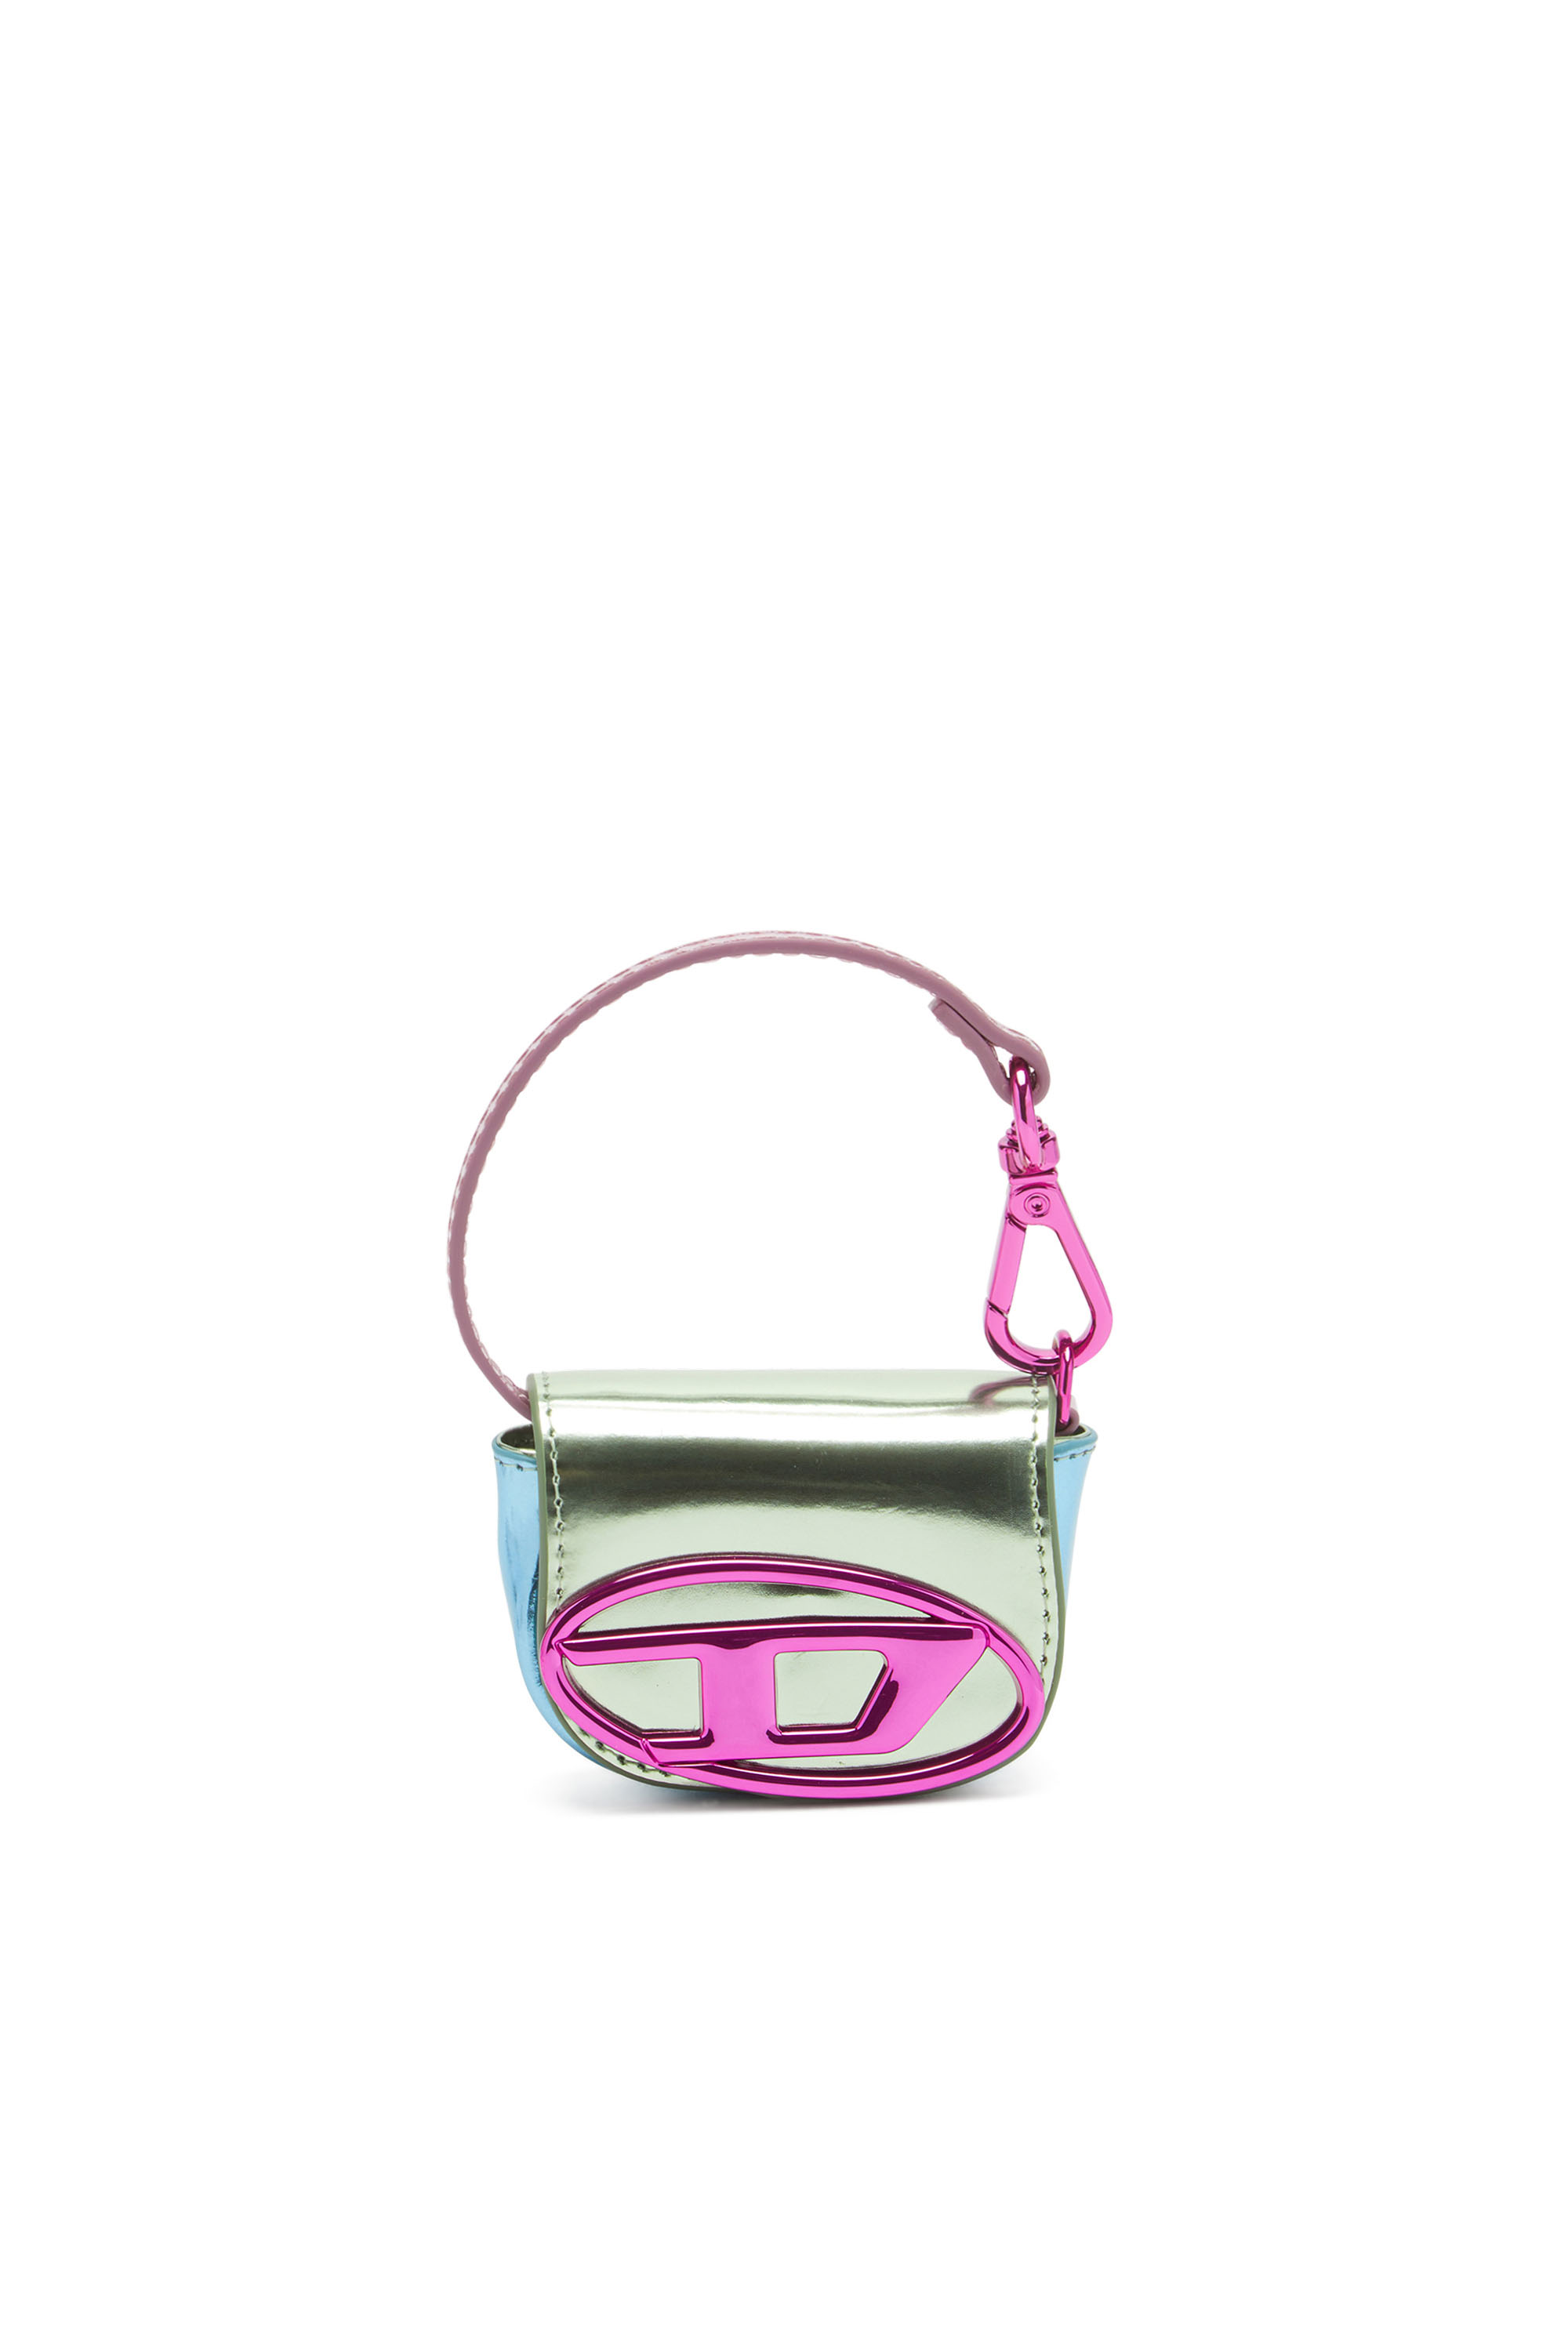 Diesel - 1DR XXS, Woman Iconic bag charm in mirror leather in Green - Image 1